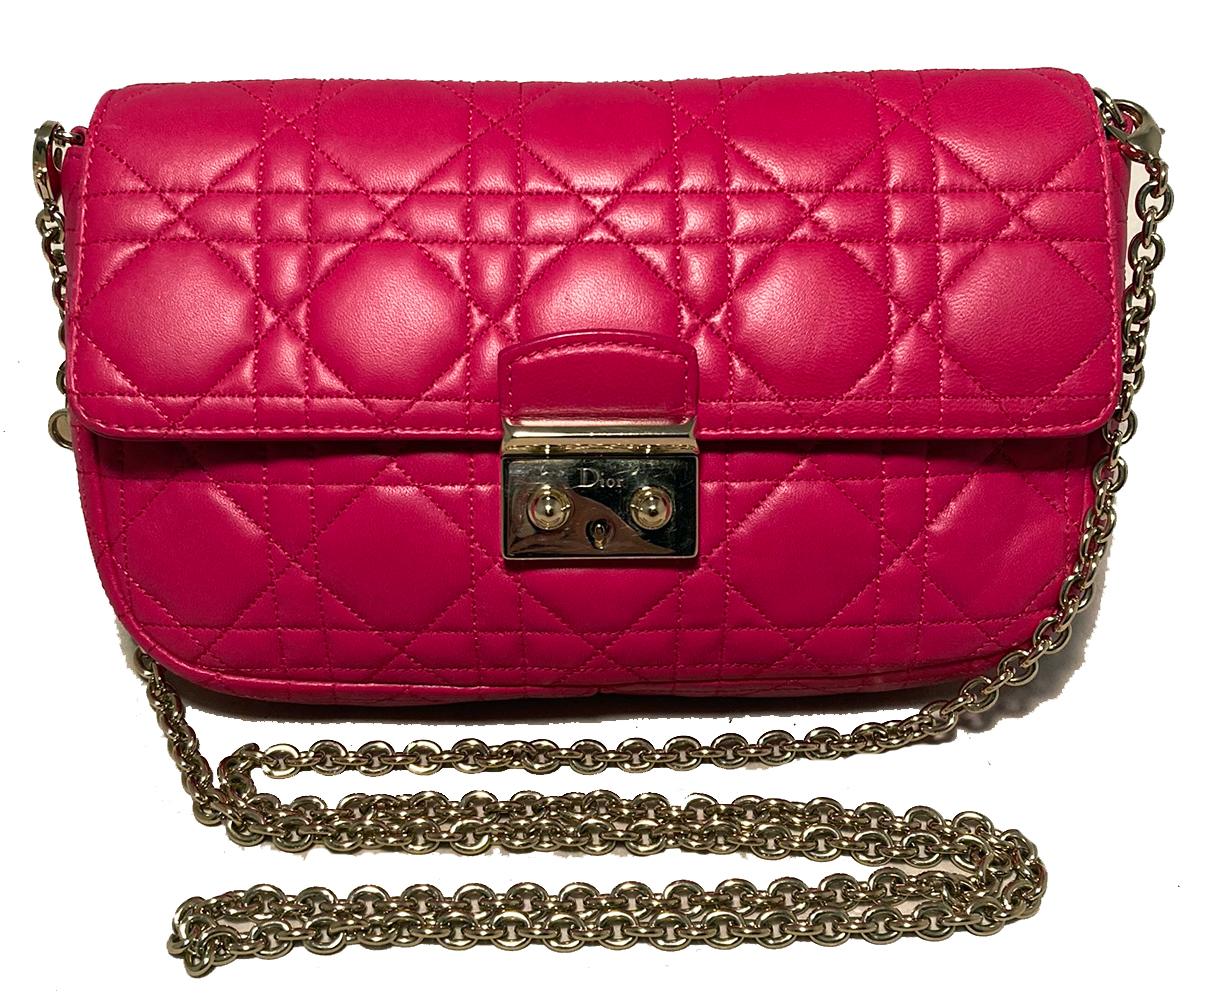 Christian Dior Pink Leather Cannage Quilted Miss Dior Flap Bag in excellent condition. Pink leather exterior in signature cannage quilted pattern trimmed with gold hardware. Front pinch latch closure opens to a pink leather interior with a black